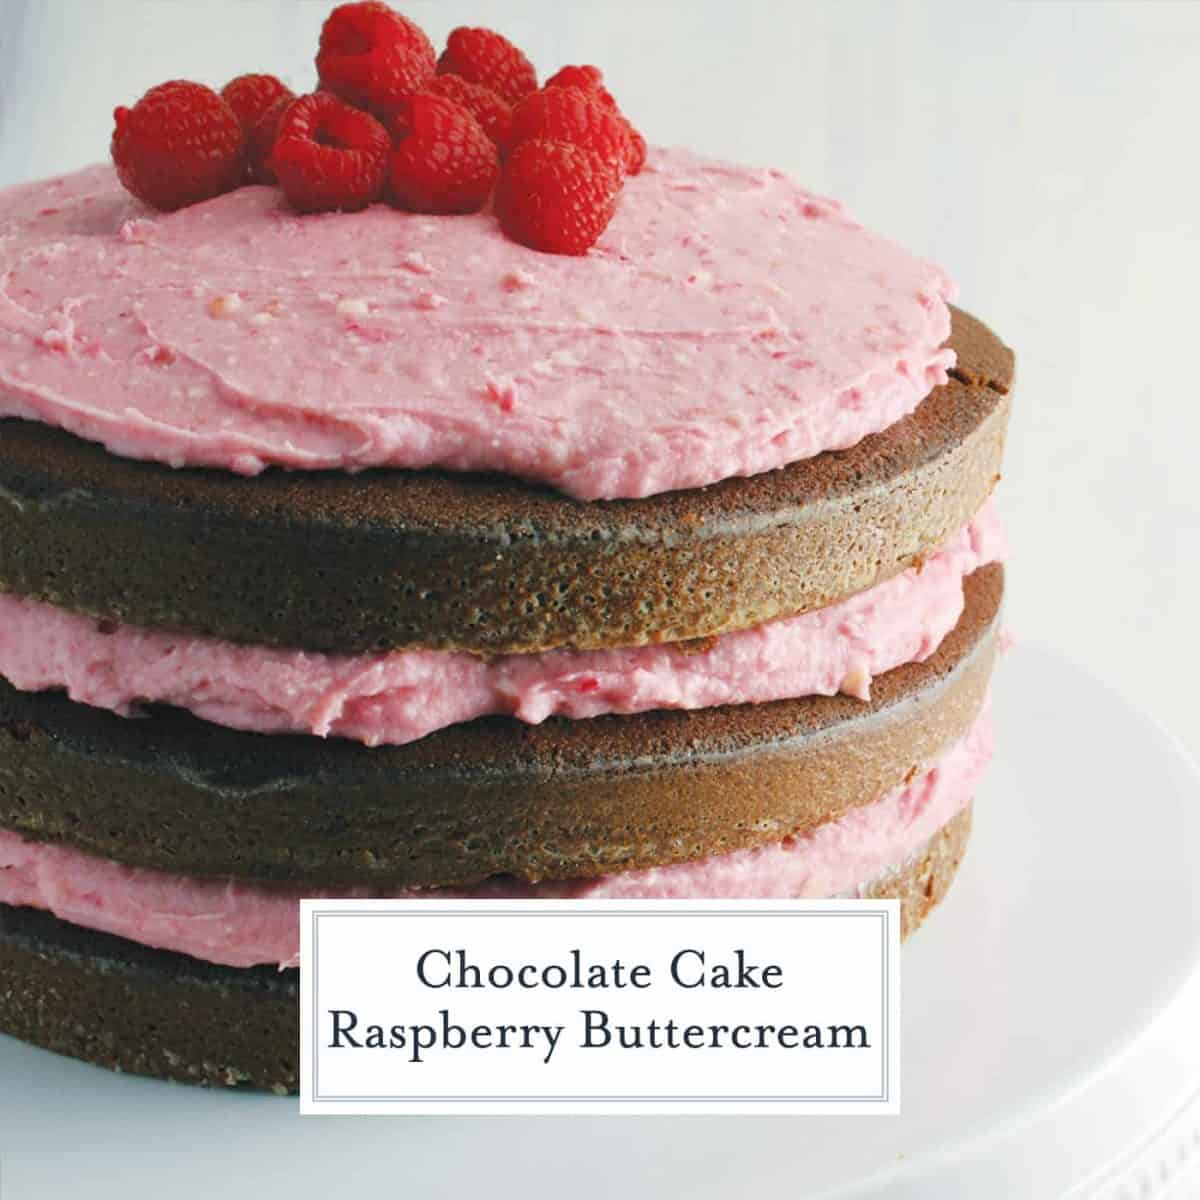 Naked cakes are all the rage right now, so I created a three layer Chocolate Cake with Raspberry Buttercream. Yum! #nakedcakes #chocolatecake #raspberrybuttercream www.savoryexperiments.com